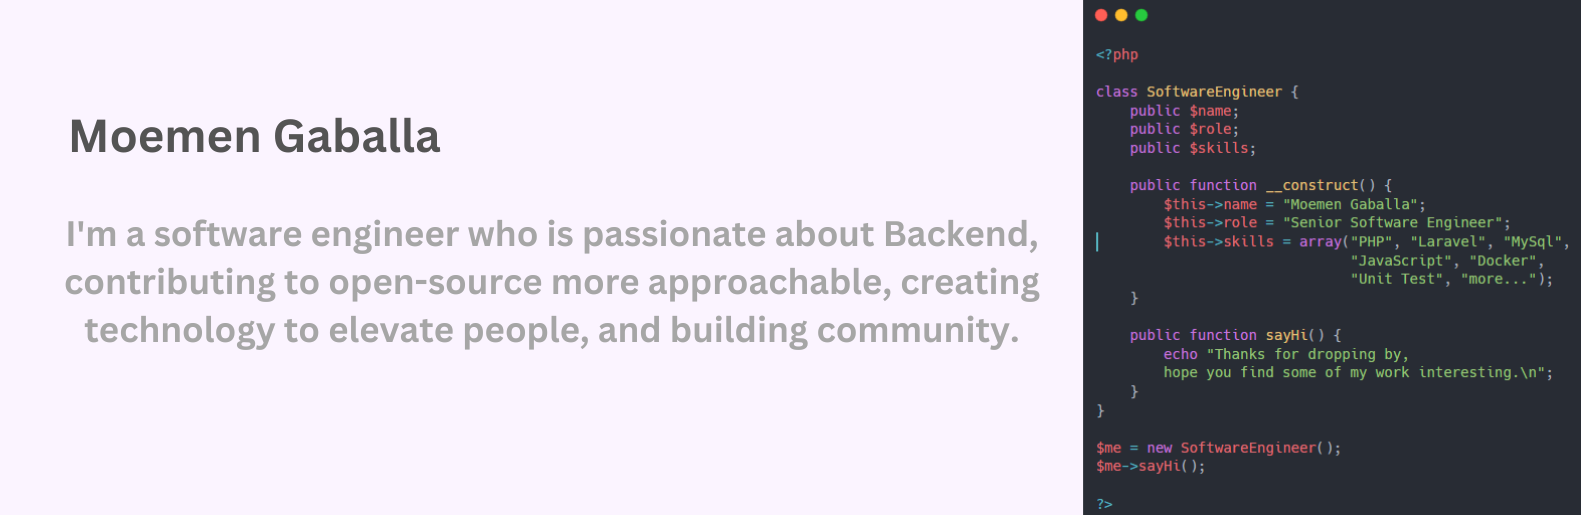 banner that says Moemen Gaballa - software engineer, passionate about Backend, contributing to open-source more approachable, creating technology to elevate people, and building community.